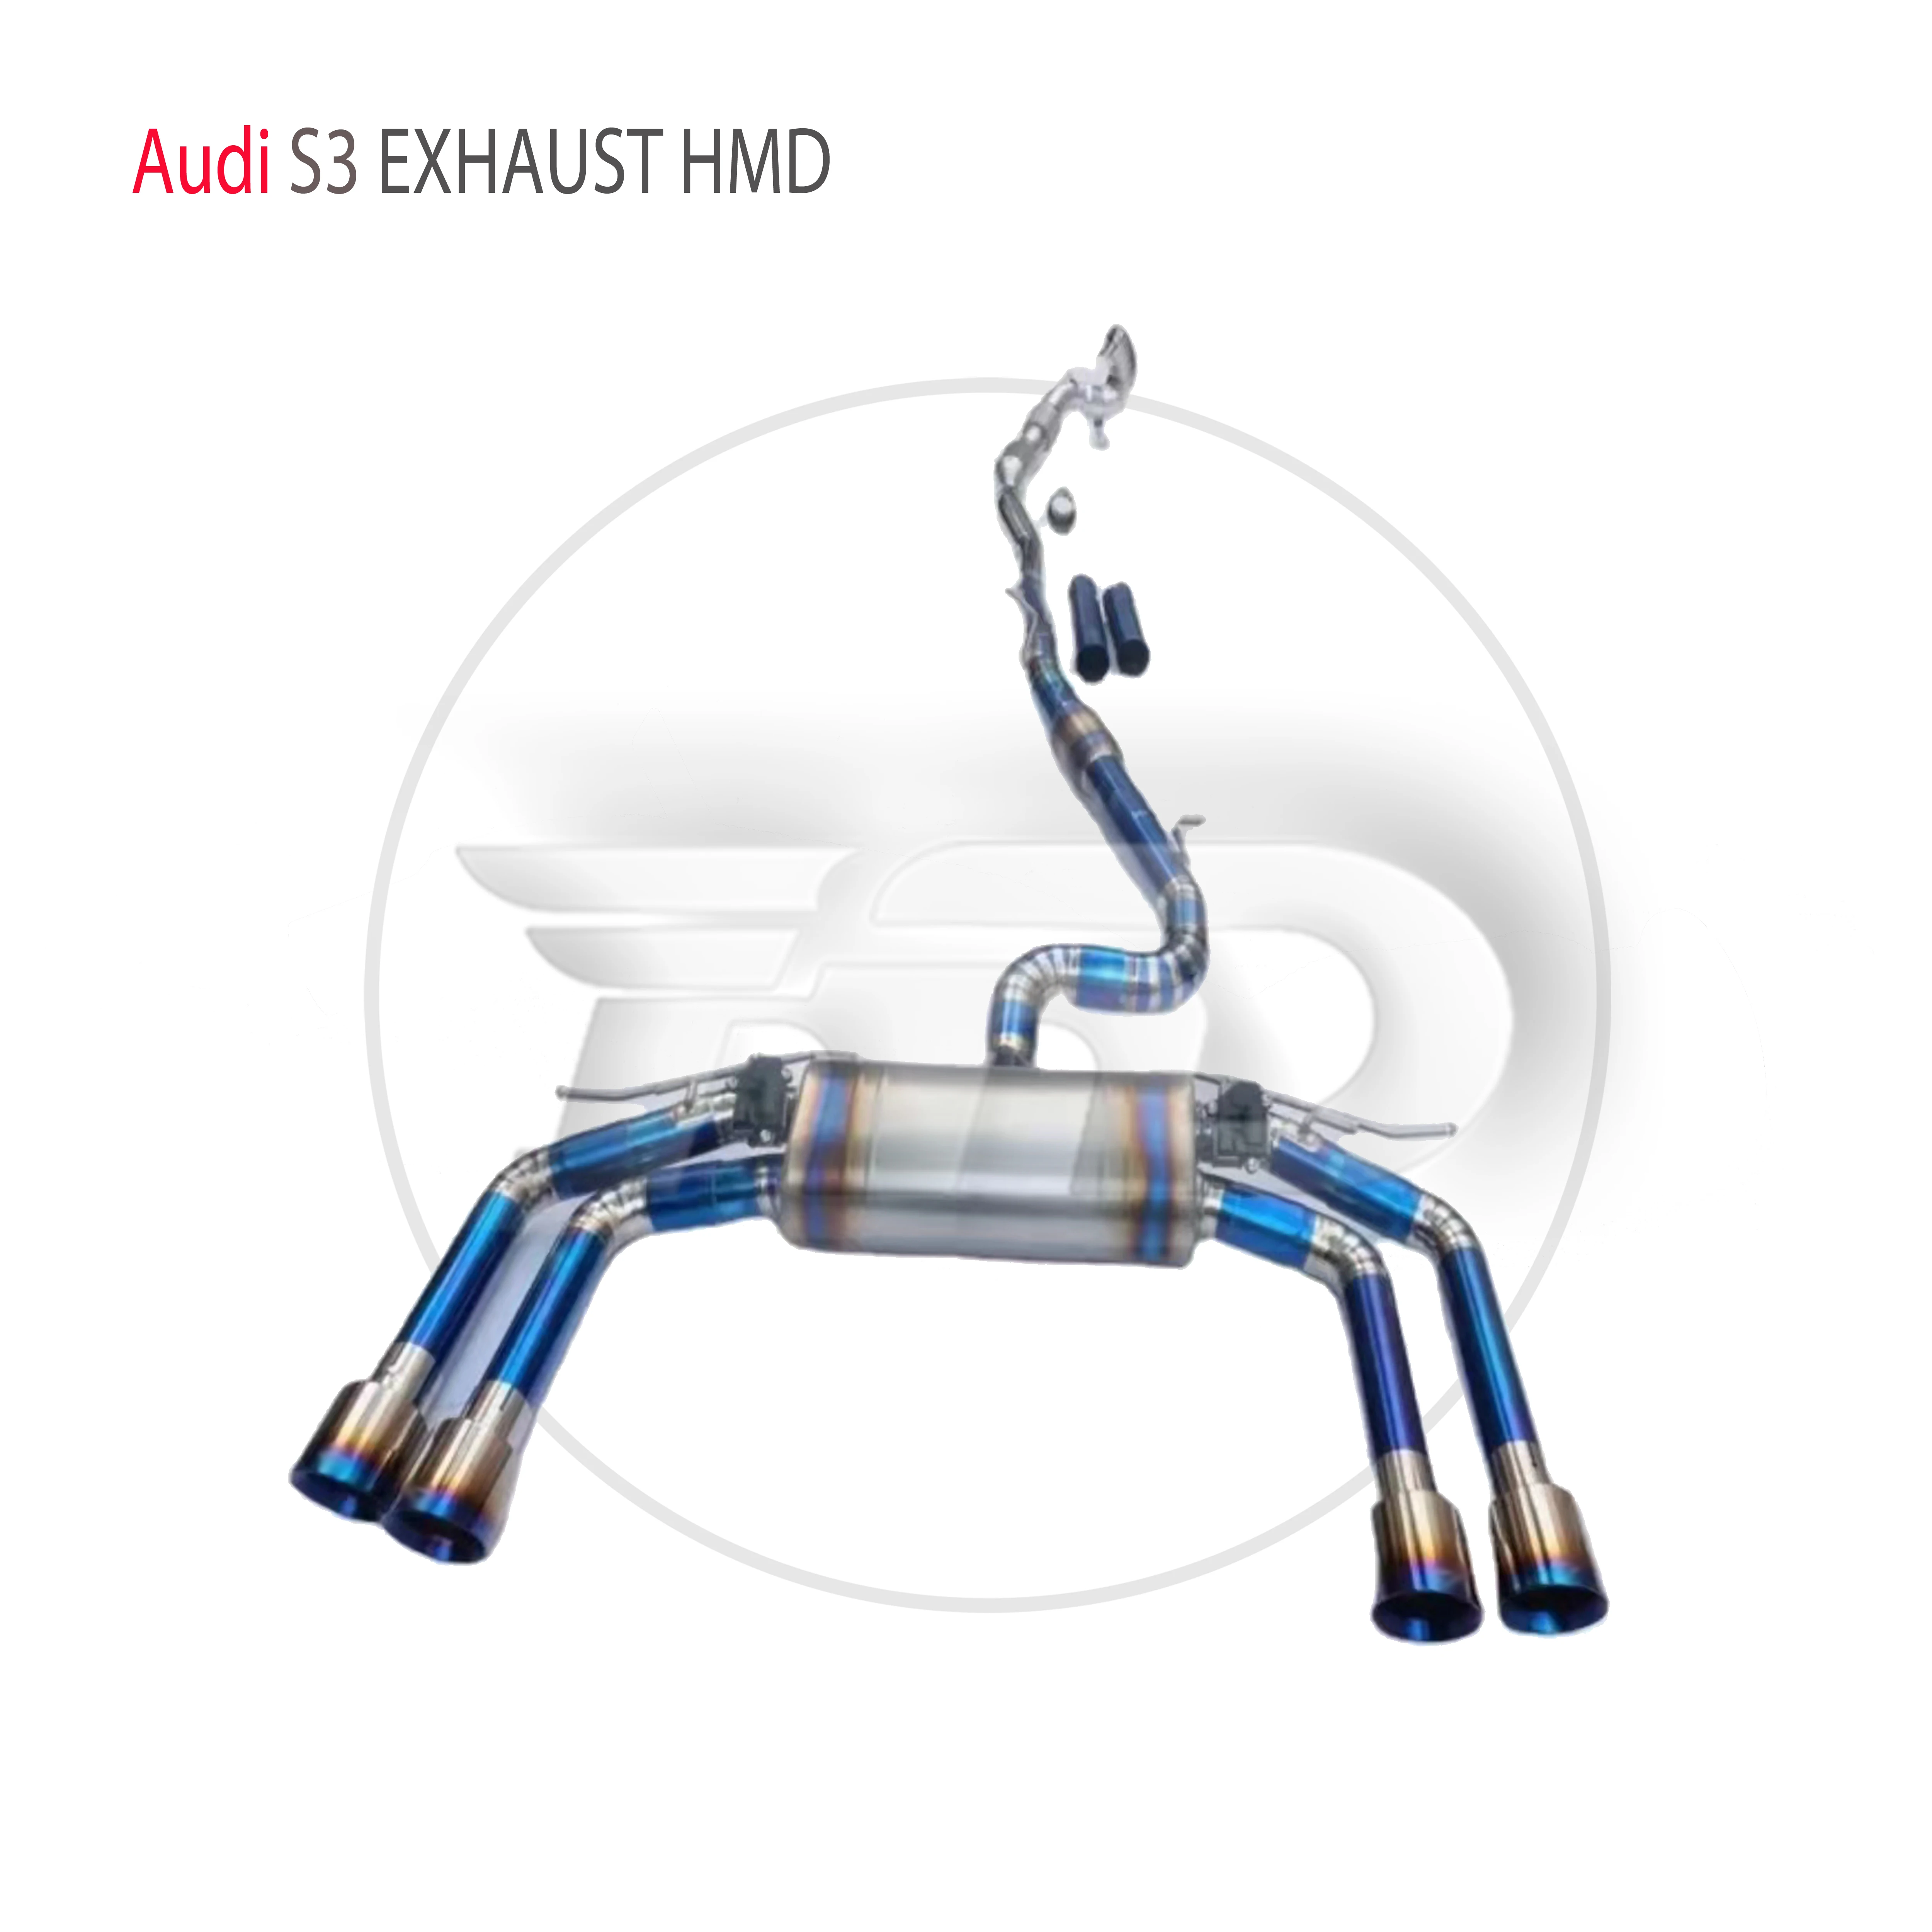 

HMD Titanium Alloy Exhaust System Performance Catback is Suitable For Audi S3 Auto Modify Electronic Valve High Flow Downpipe